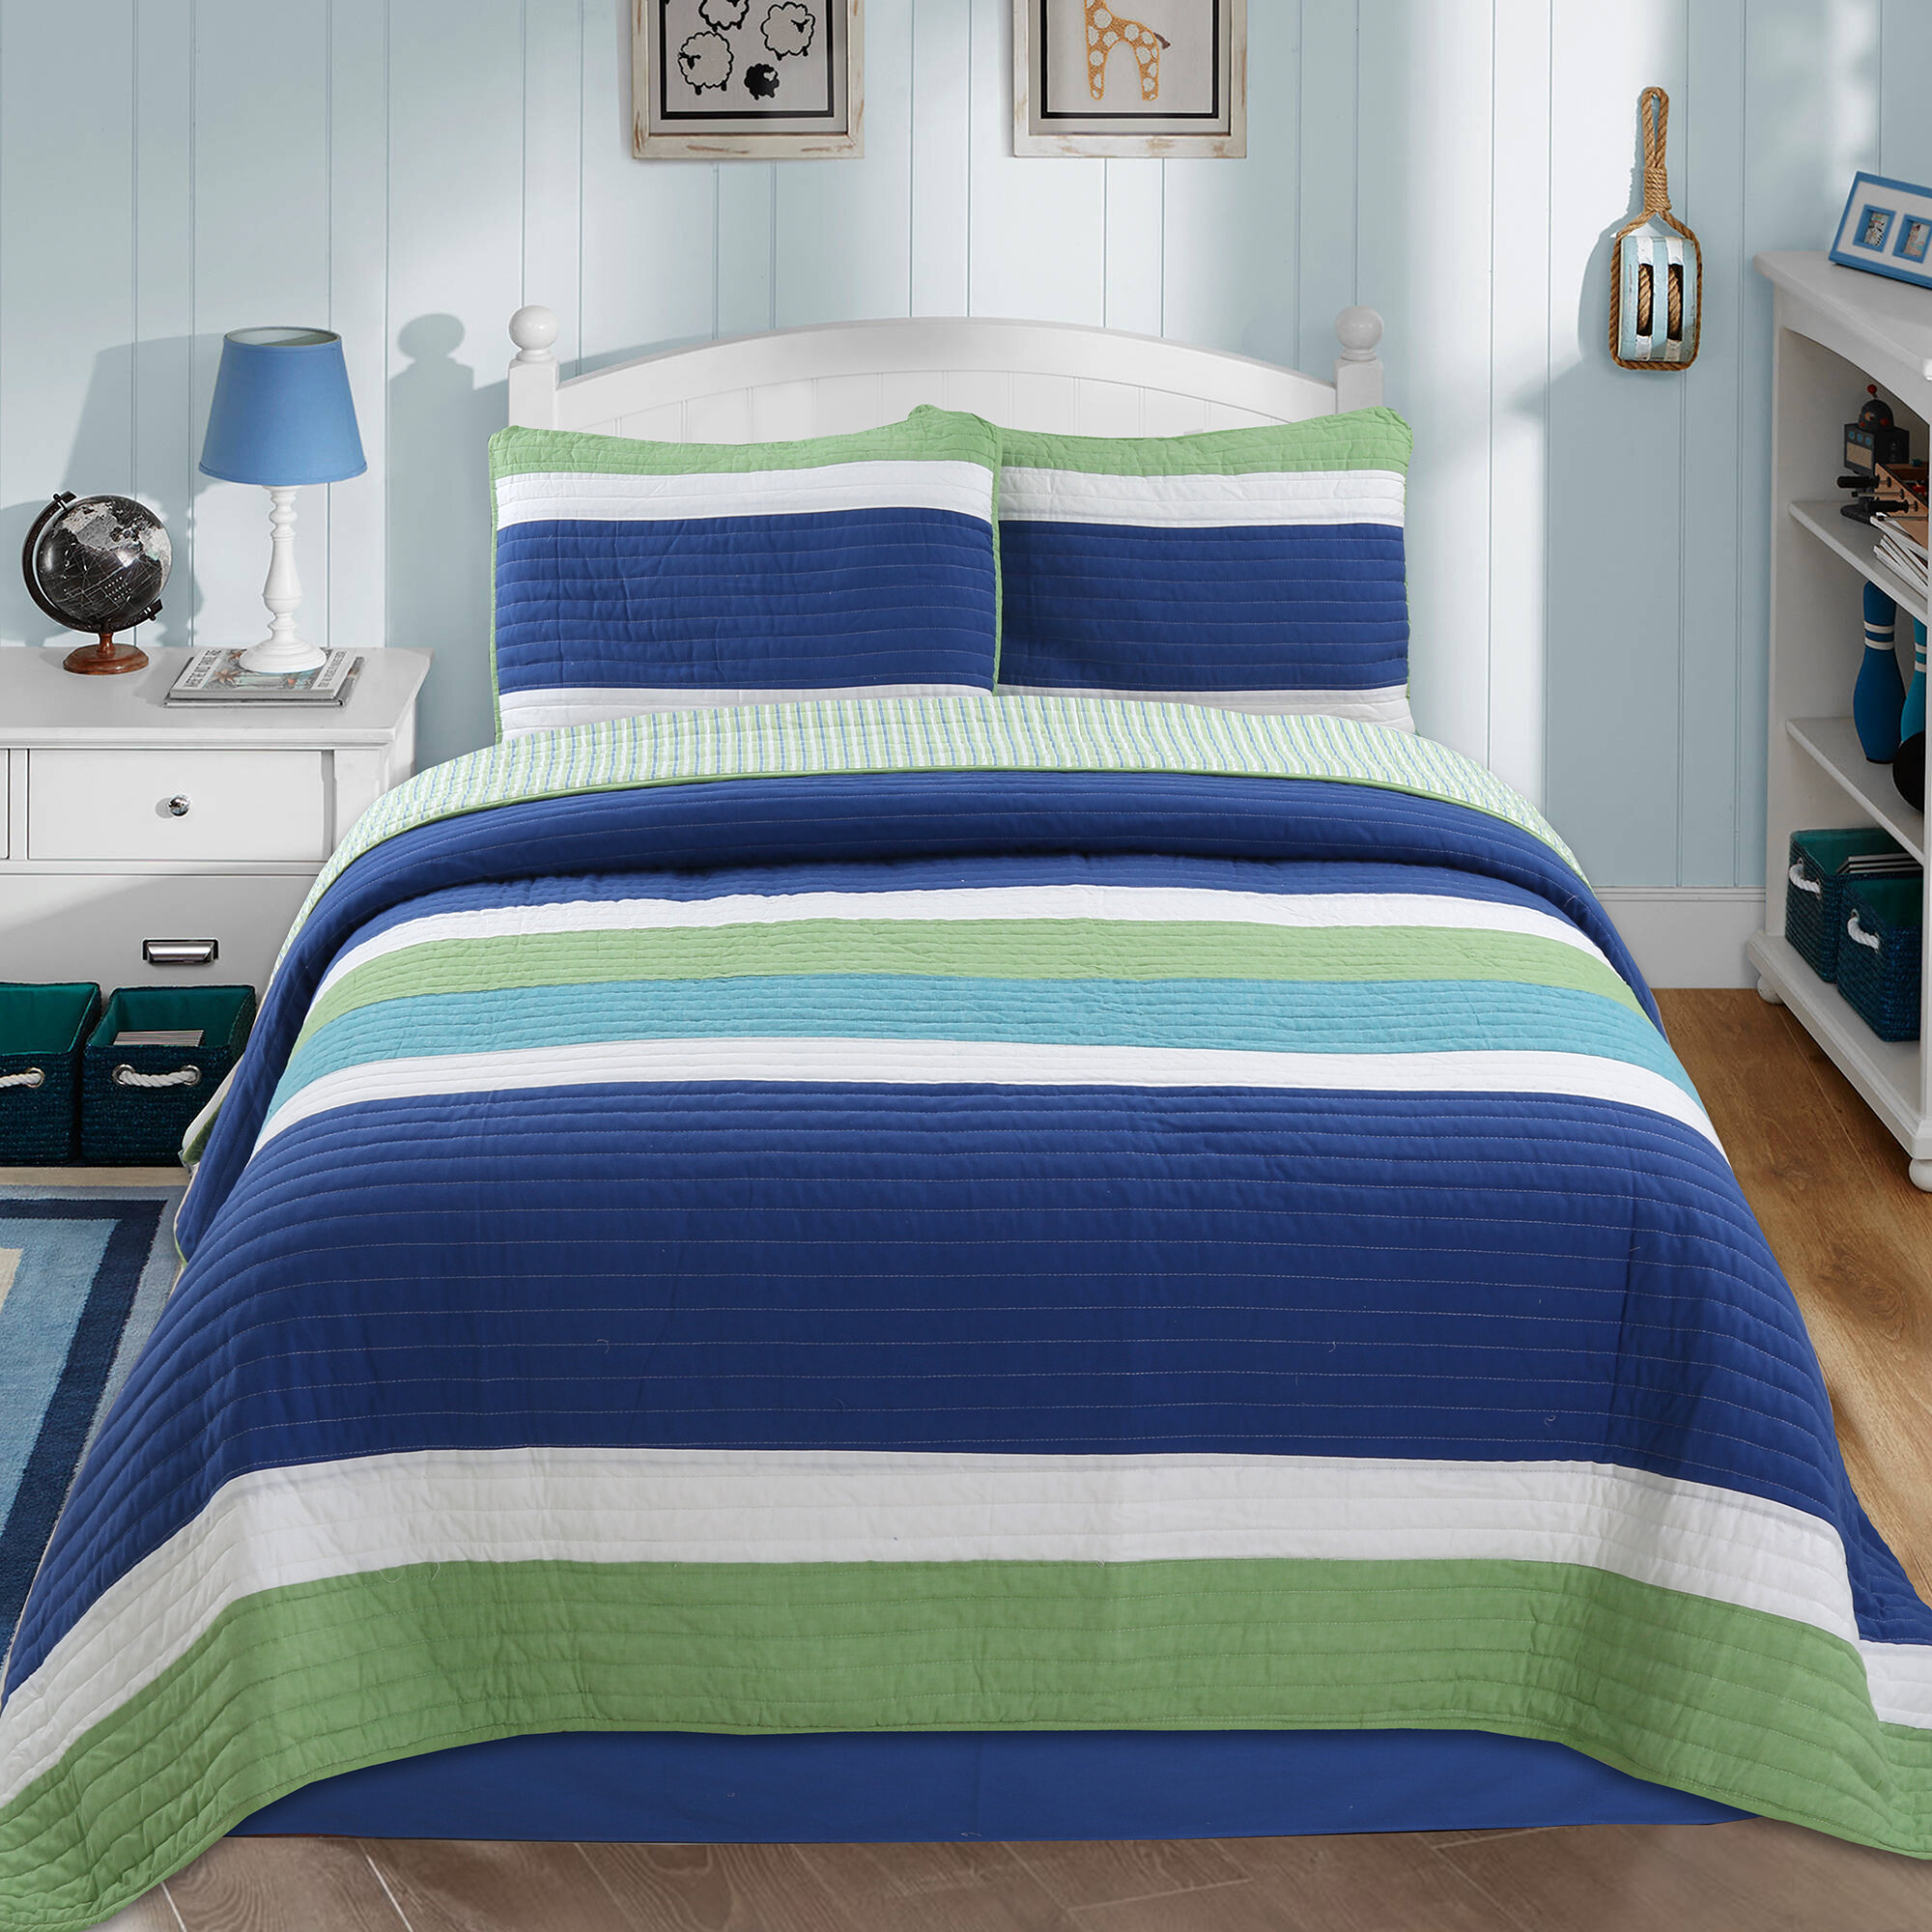 Bright Striped Duvet Cover Queen King 100 Cotton Reversible